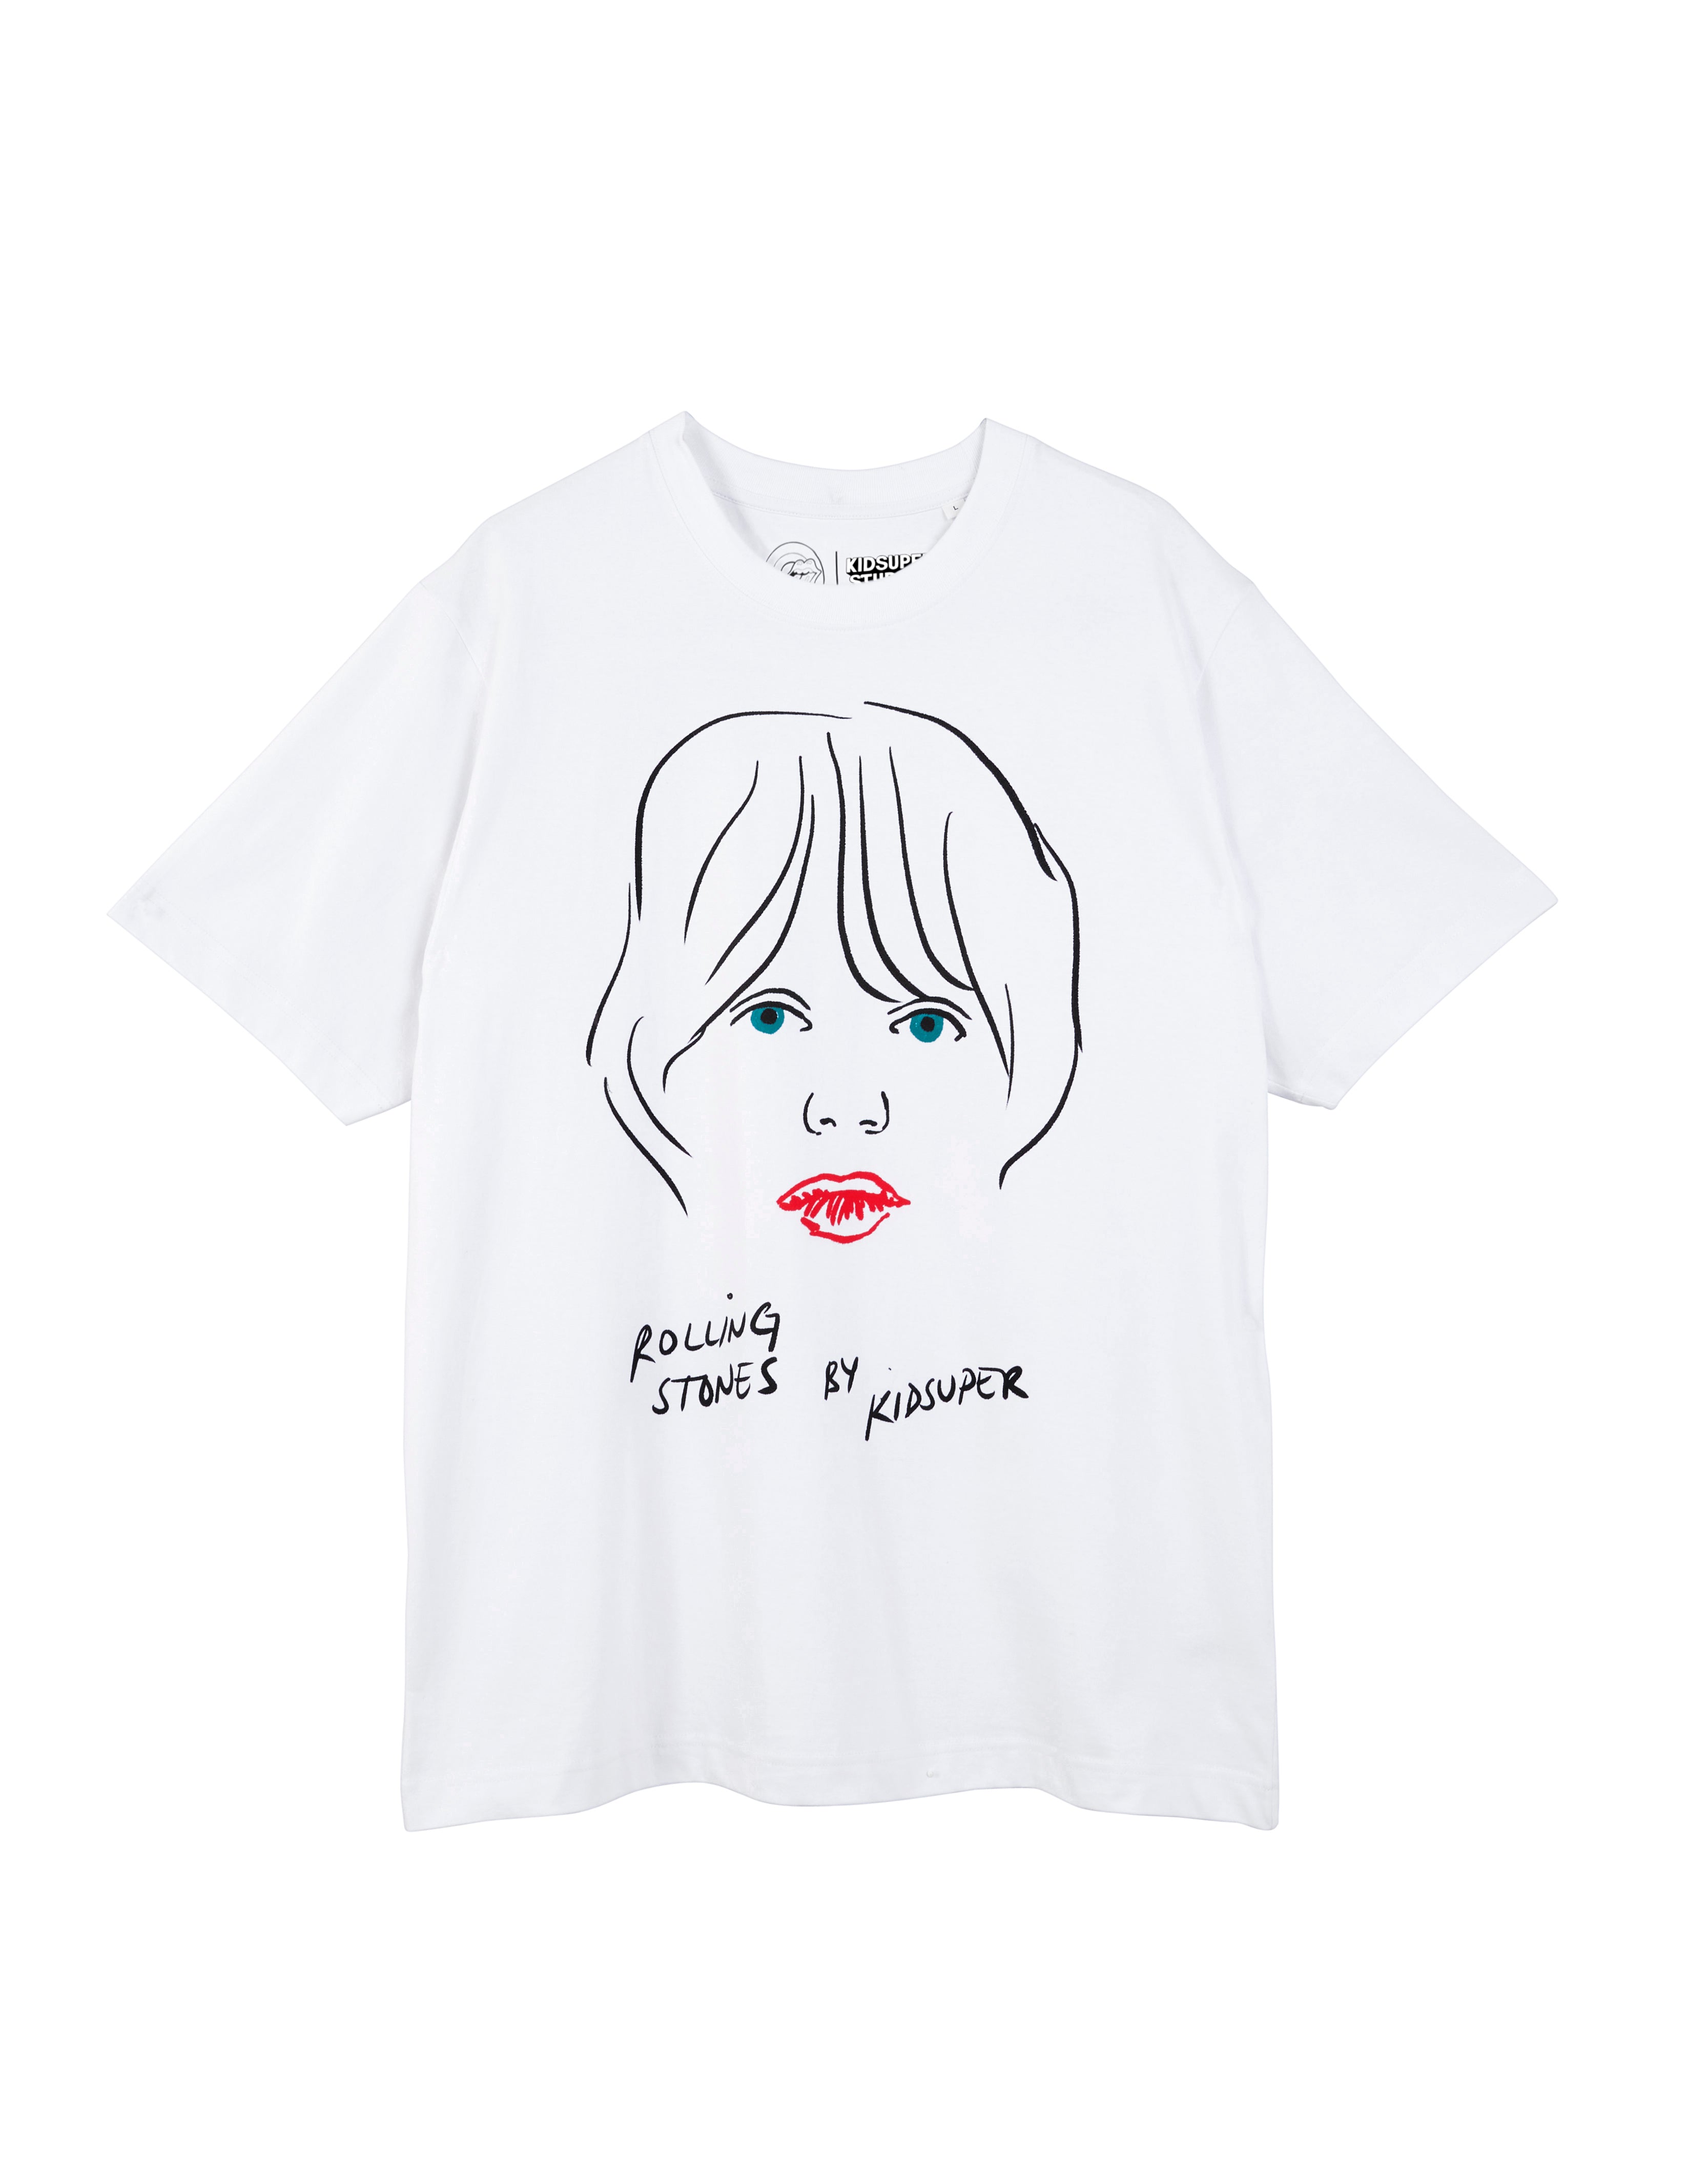 Carnaby - RS No. 9 x KidSuper Mick Sketch White T-Shirt (UK Exclusive)